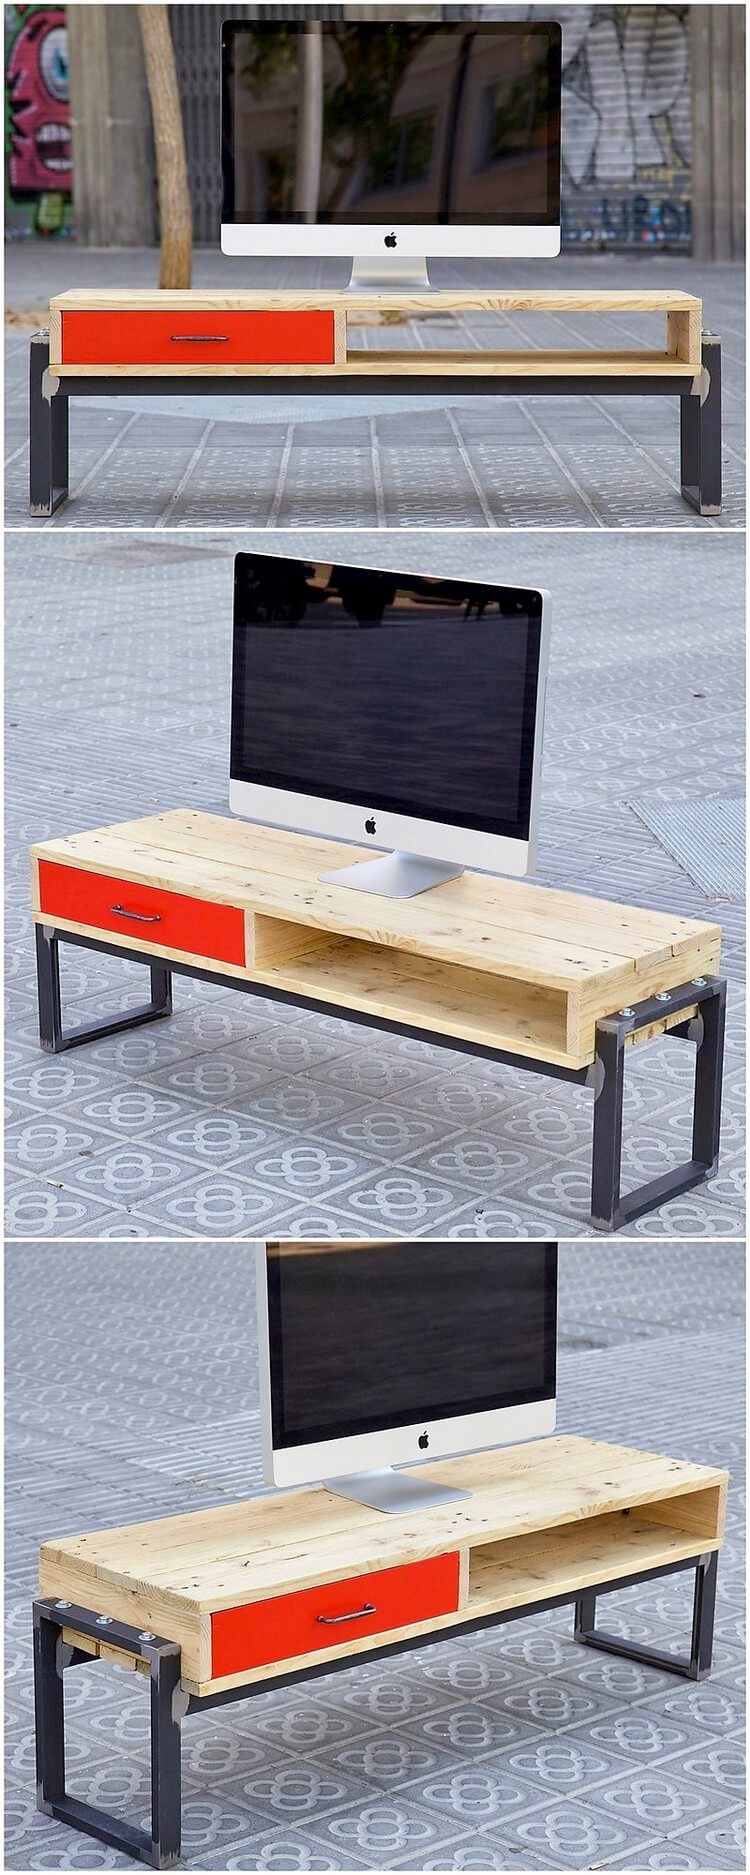 Pallet TV Stand with Drawers